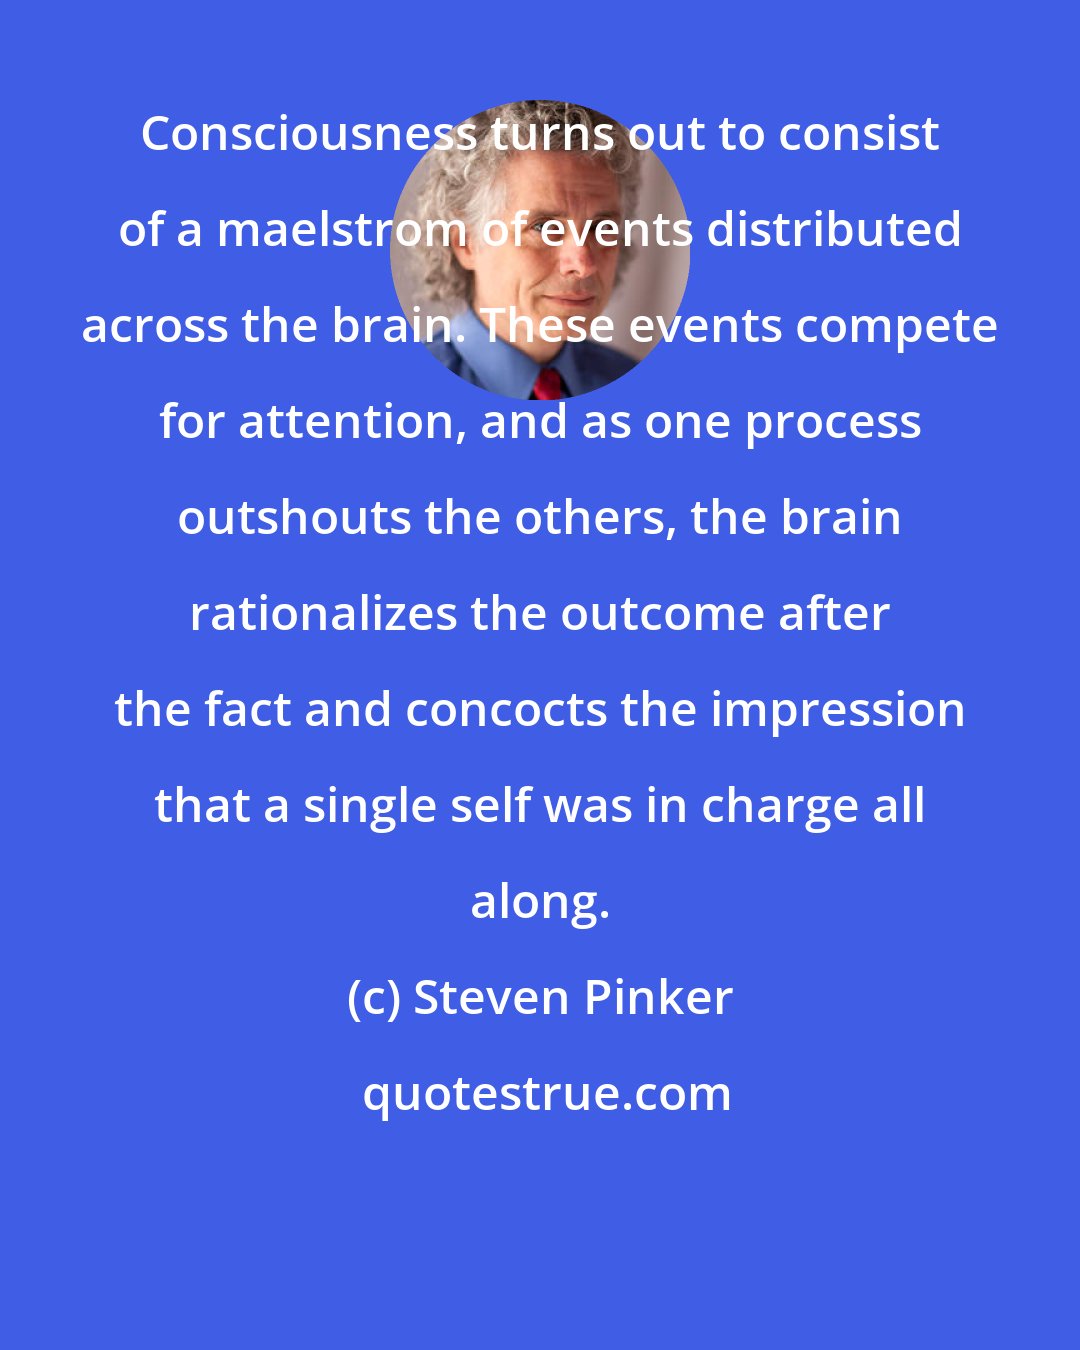 Steven Pinker: Consciousness turns out to consist of a maelstrom of events distributed across the brain. These events compete for attention, and as one process outshouts the others, the brain rationalizes the outcome after the fact and concocts the impression that a single self was in charge all along.